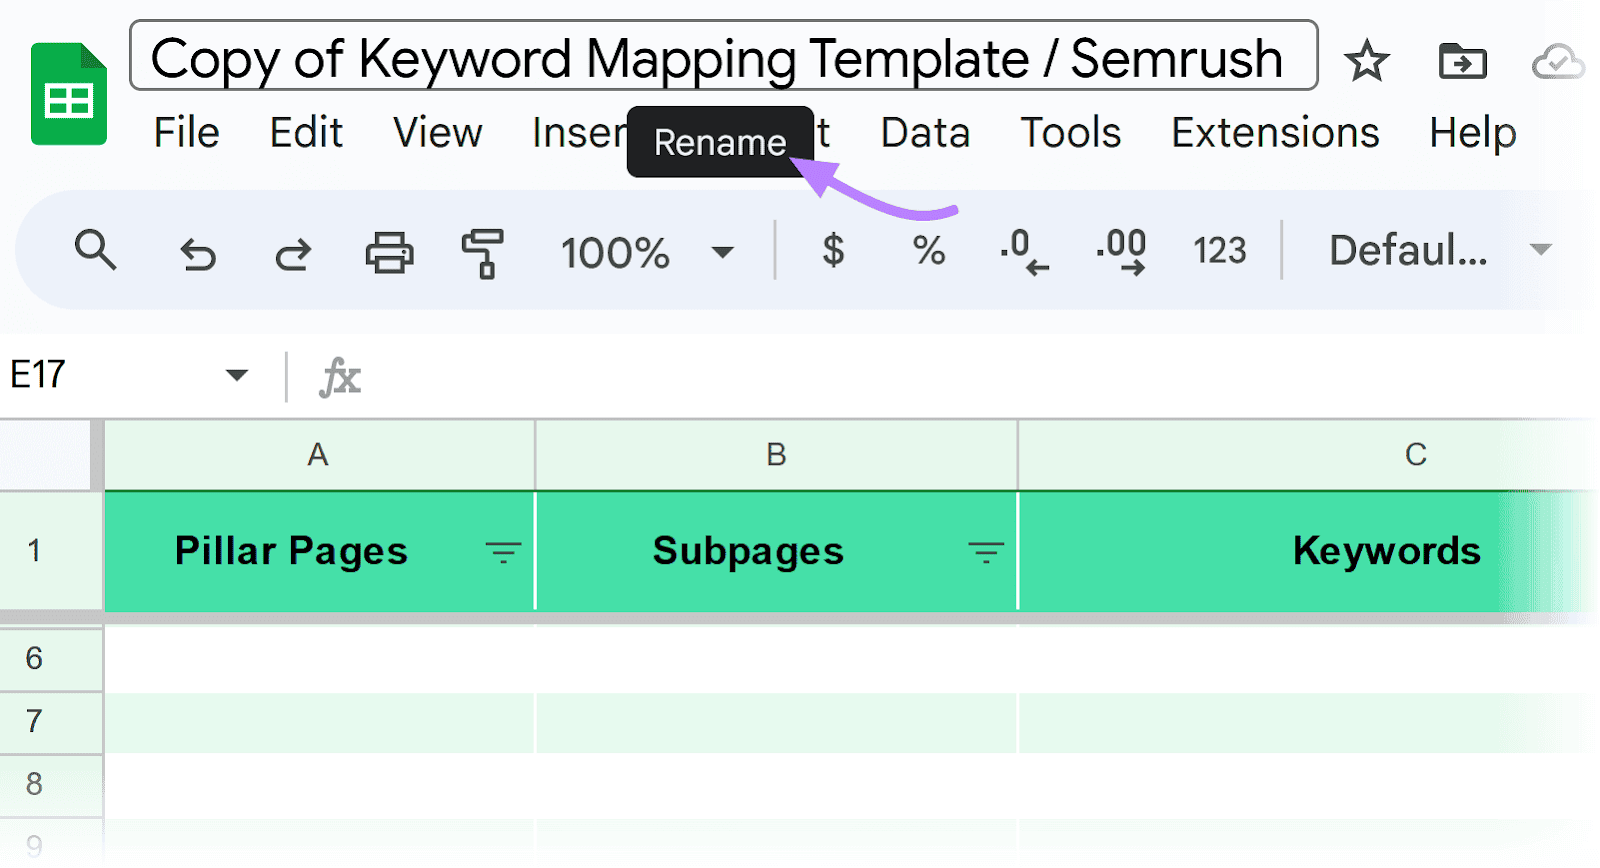 Zoomed-in Semrush template showing a black "Rename" label and an arrow, indicating where to rename your keyword map.